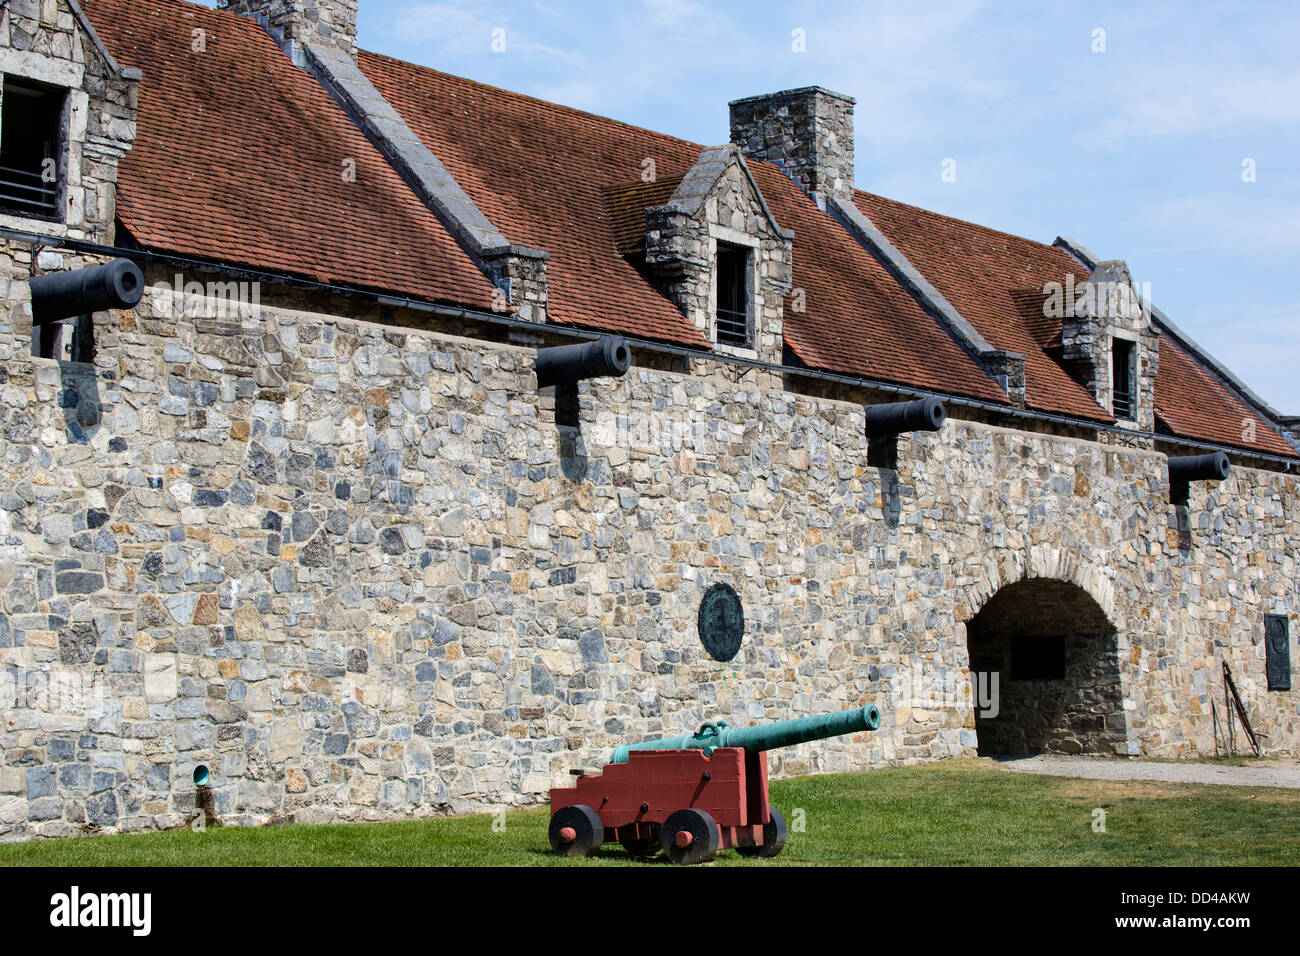 Entrance to Fort Ticonderoga with cannon. Stock Photo